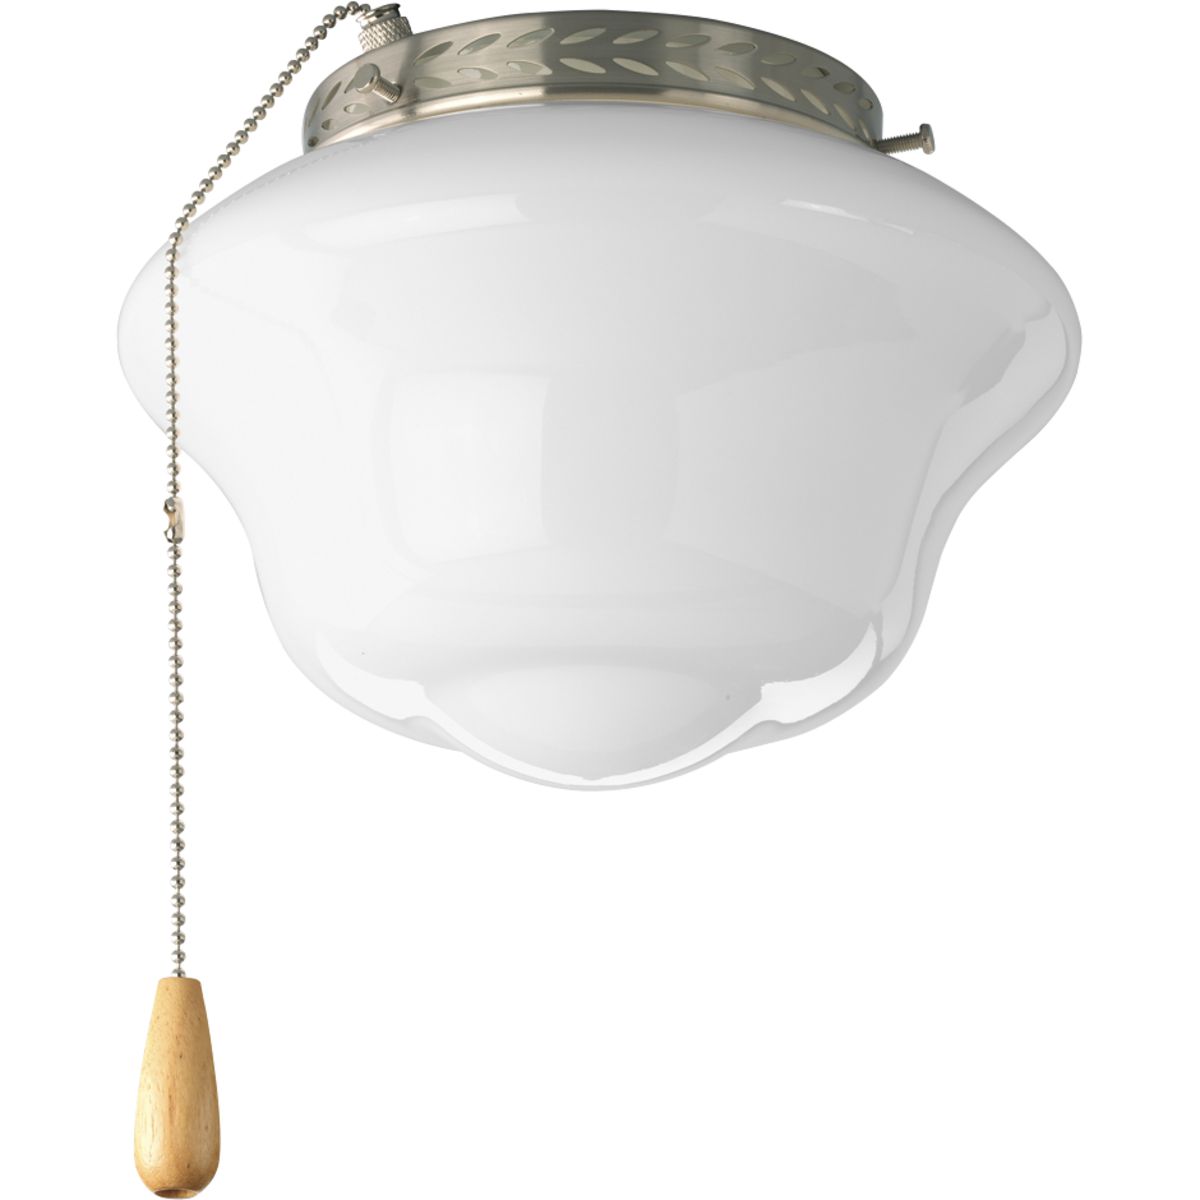 This light kit features a nostalgic schoolhouse, opal glass diffuser that's ideal for lighting in a bedroom. This fan light kit includes threaded adapter for connection to most ceiling fans that accept an accessory light. Convenient Chrome pull-chain operation with a matching maple fob. Includes one 3000K, 800 lumen each (source), Title 24 certified LED bulb.